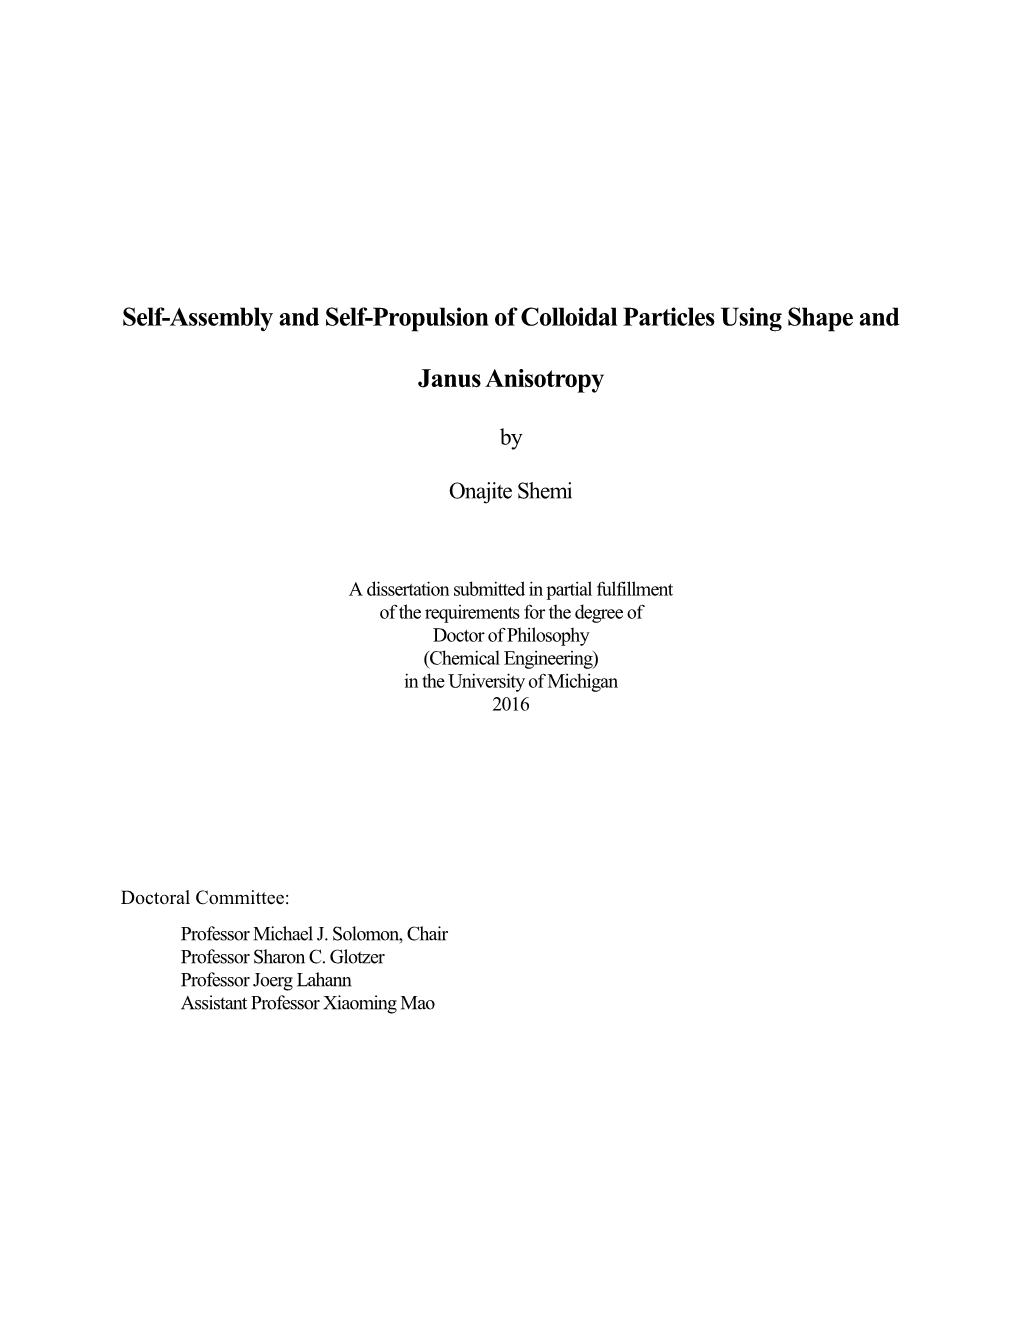 Self-Assembly and Self-Propulsion of Colloidal Particles Using Shape And